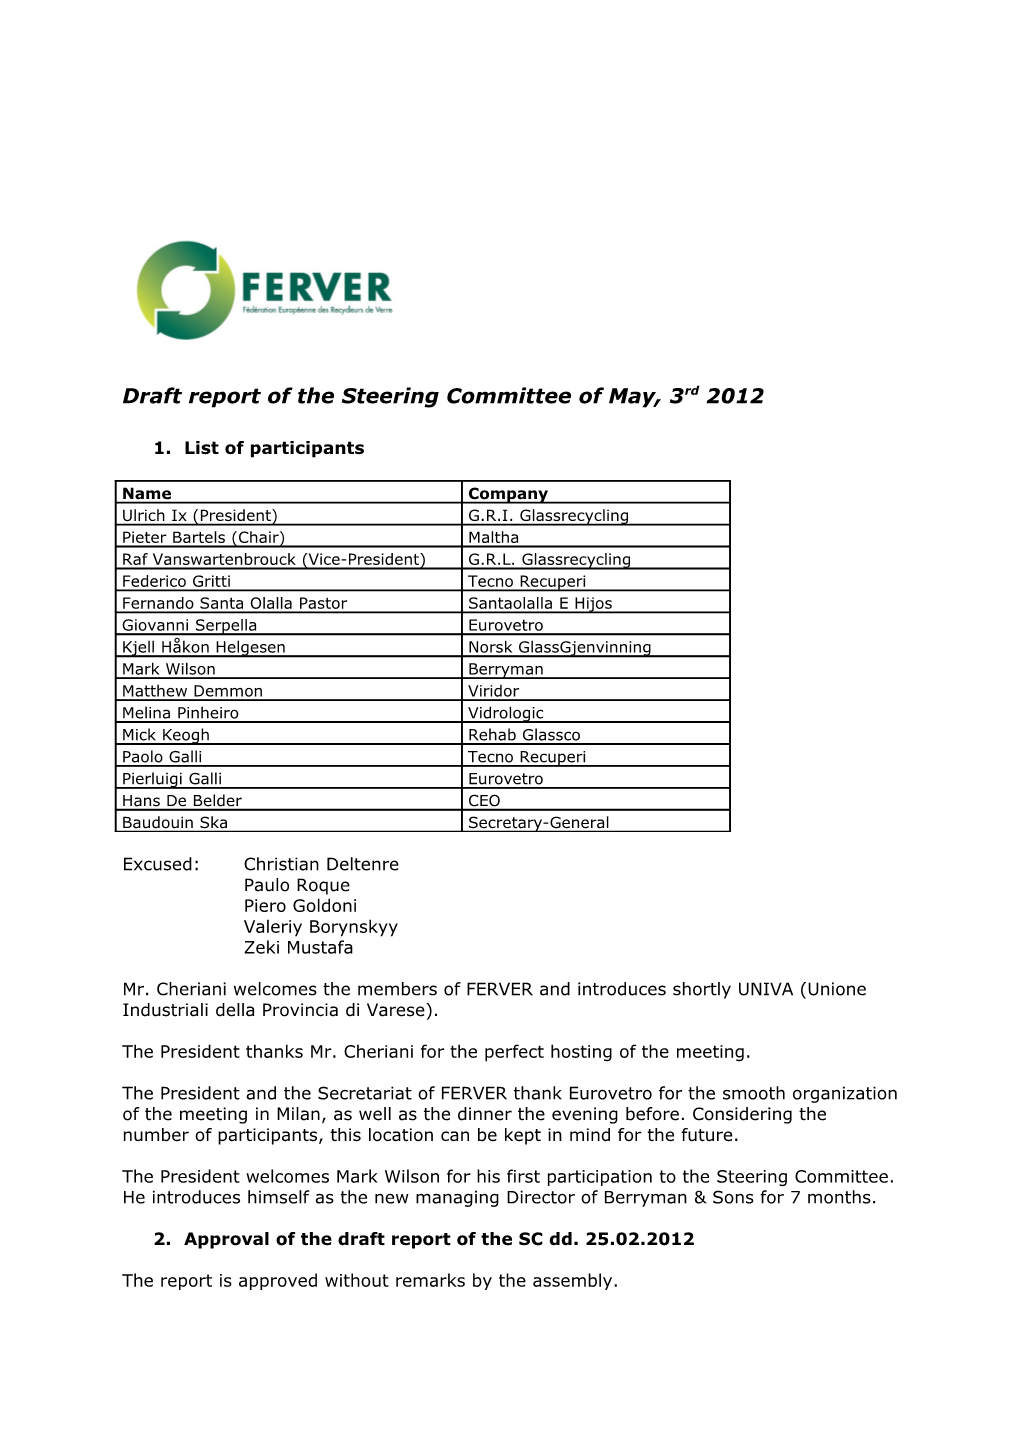 Draft Report of the Steering Committee Ofmay,3Rd2012